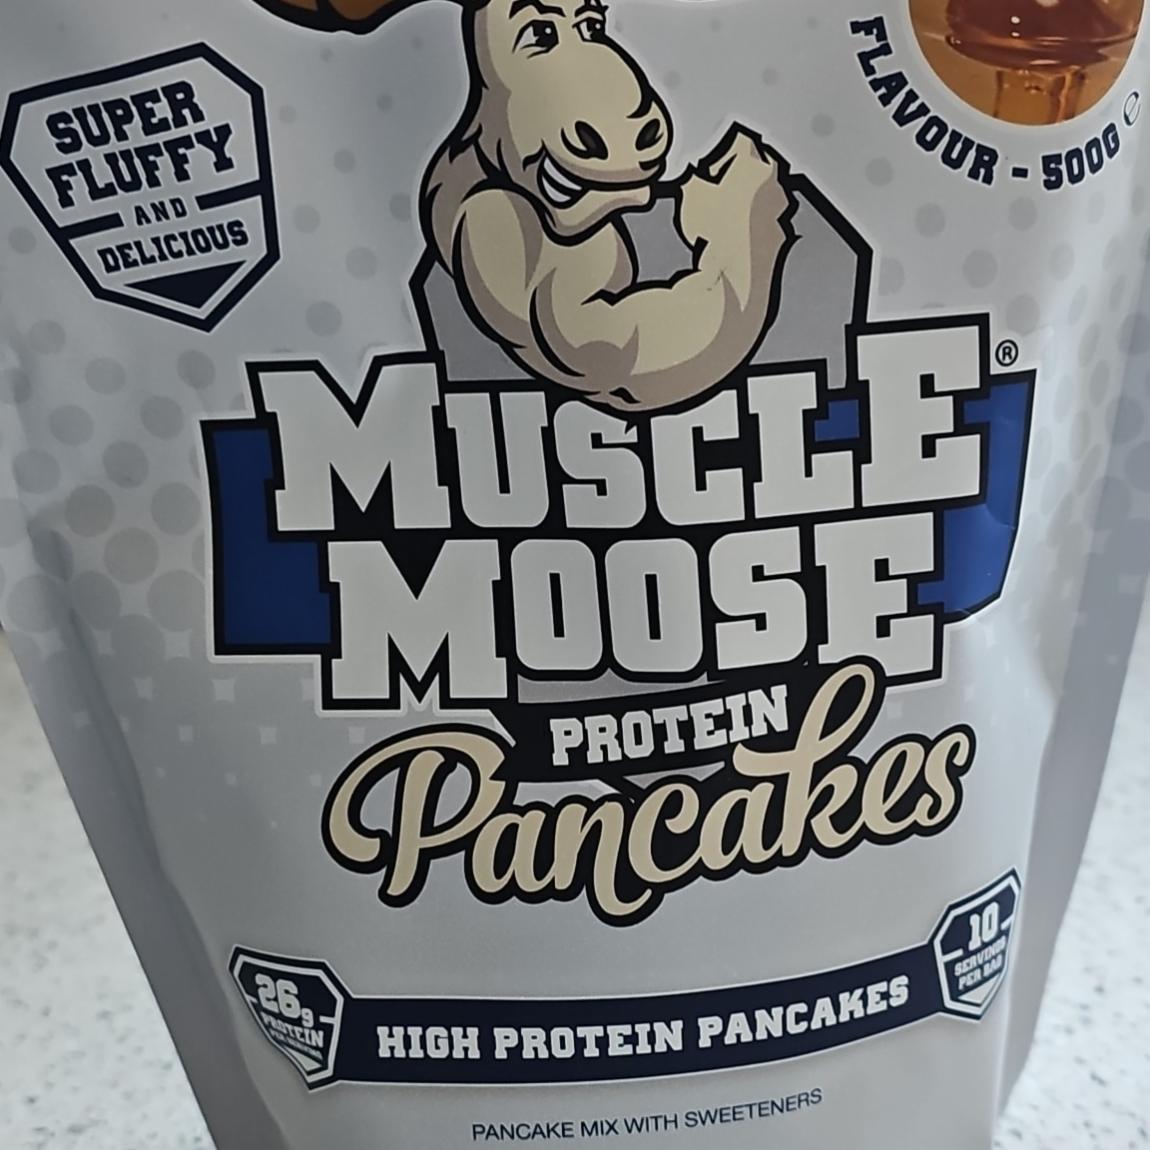 Fotografie - Protein pancakes golden syrup flavour Muscle Moose